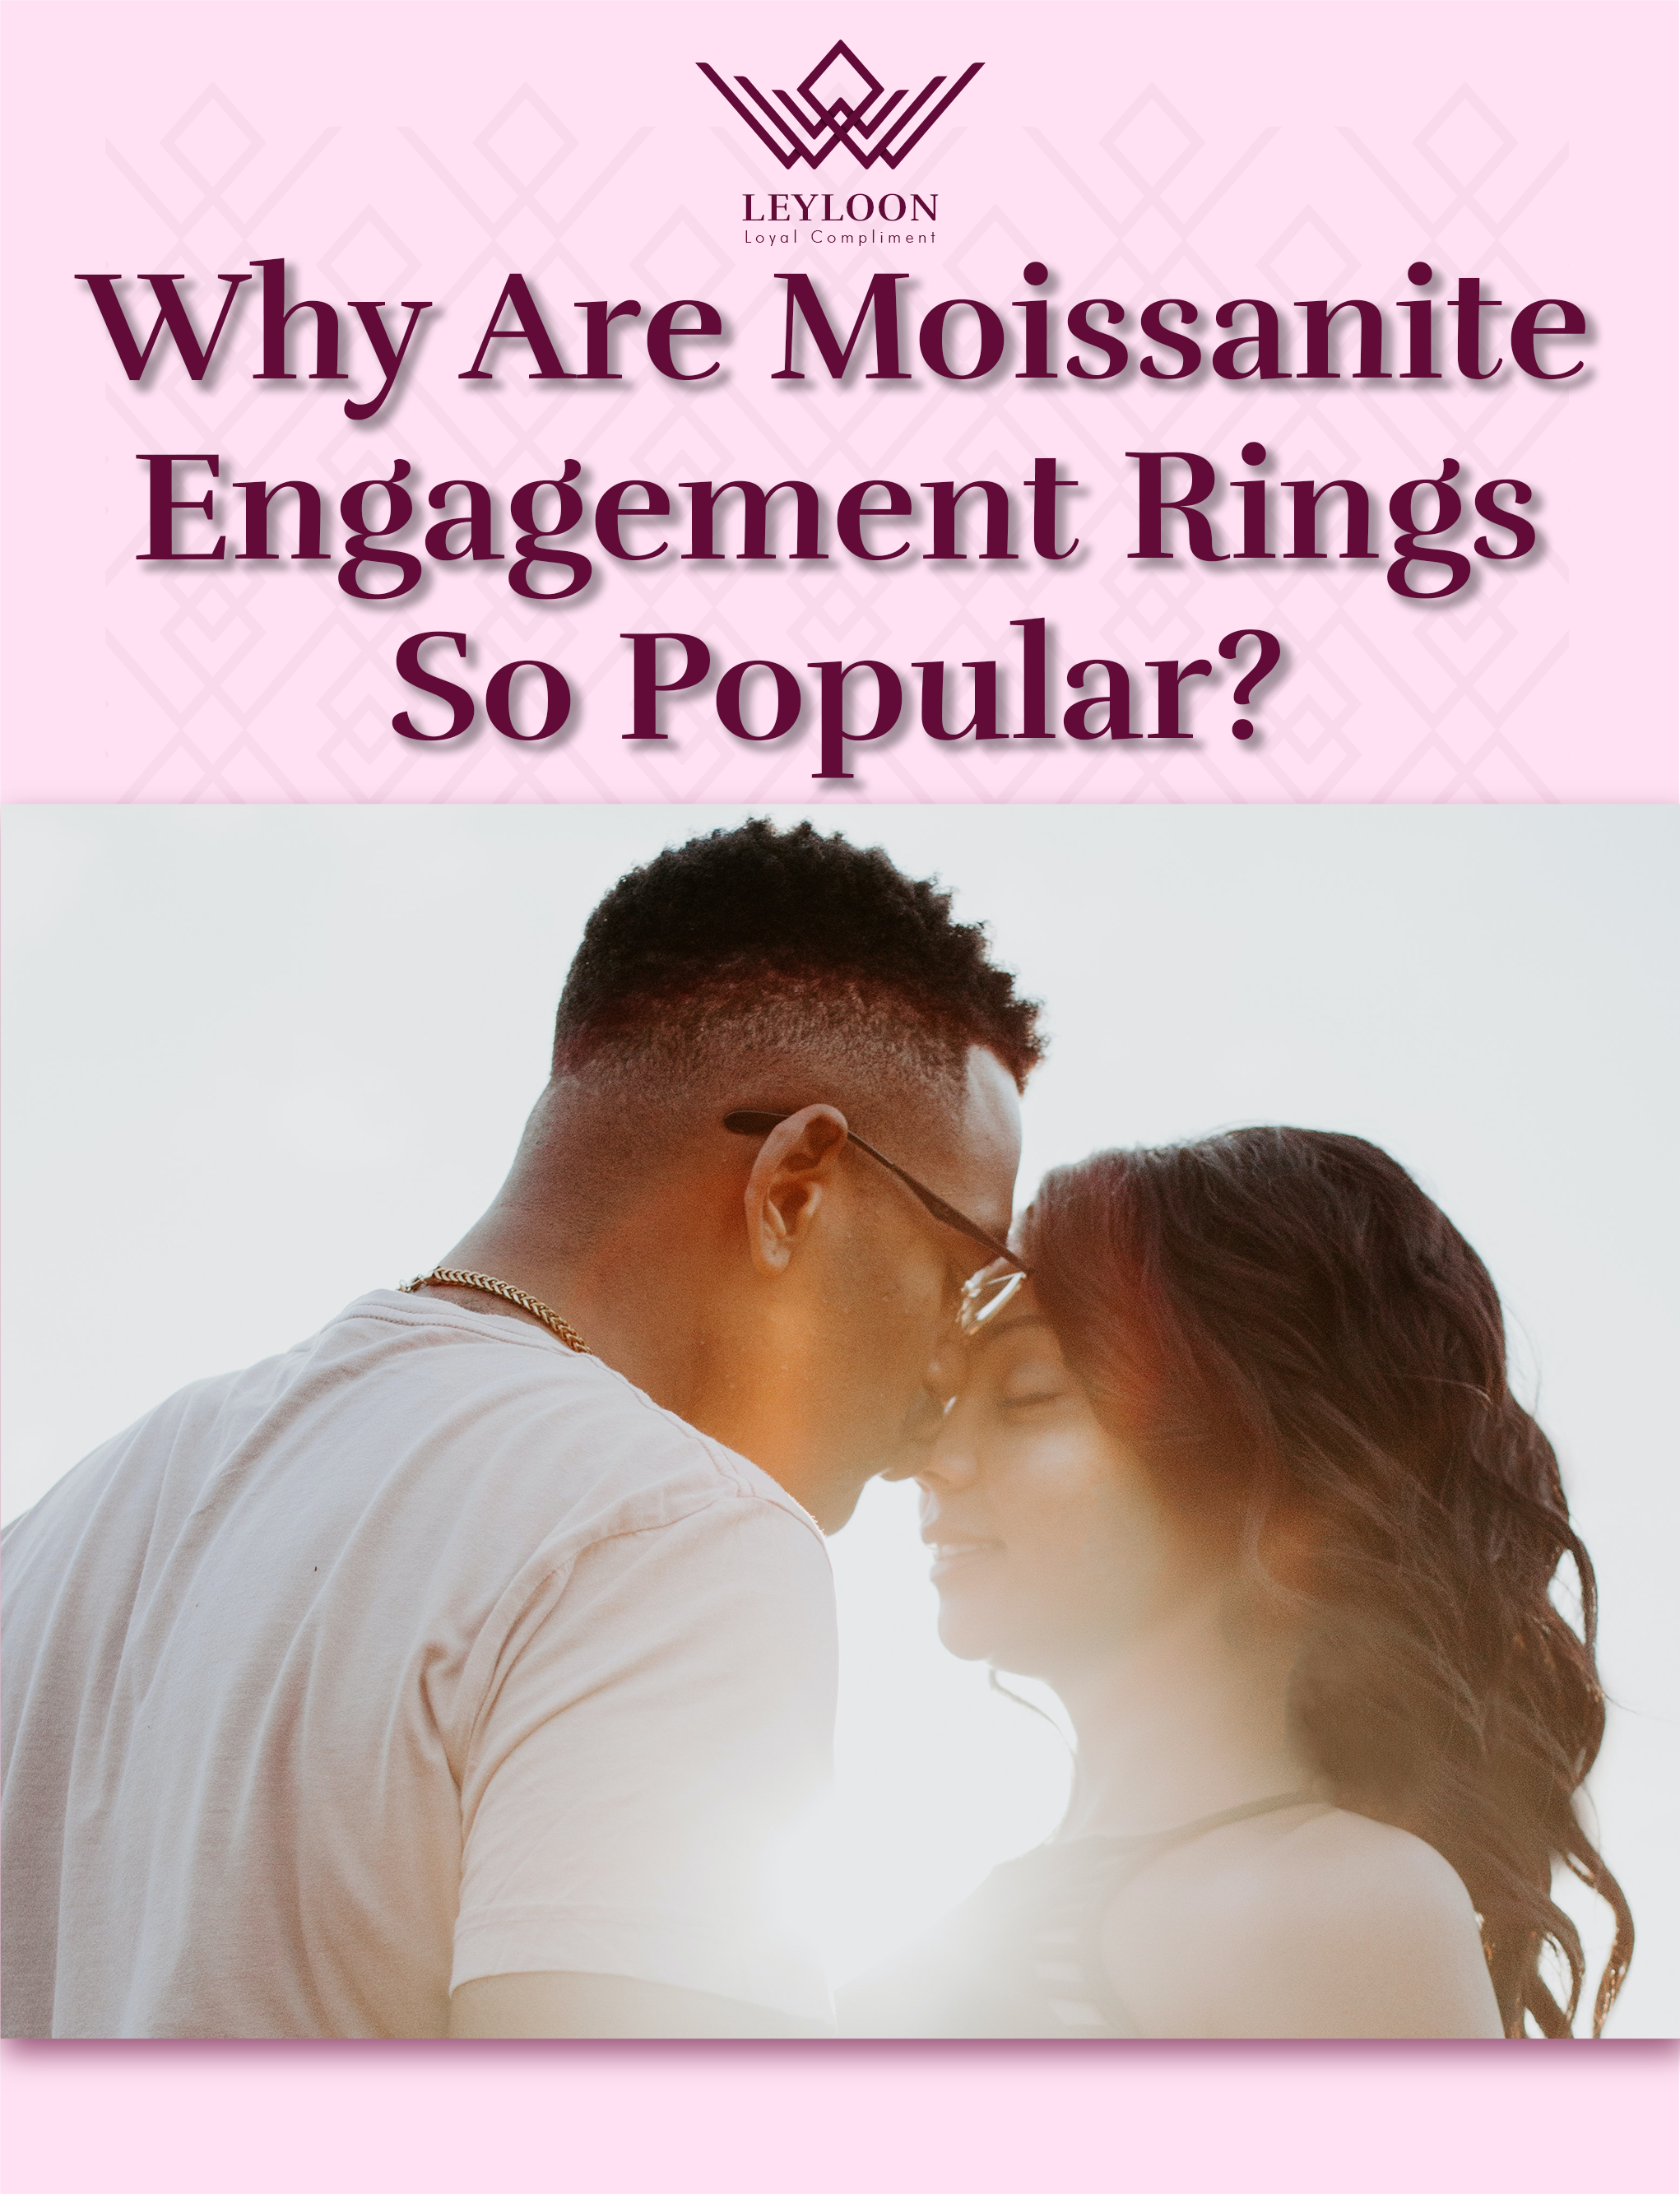 Why Are Moissanite Engagement Rings So Popular?